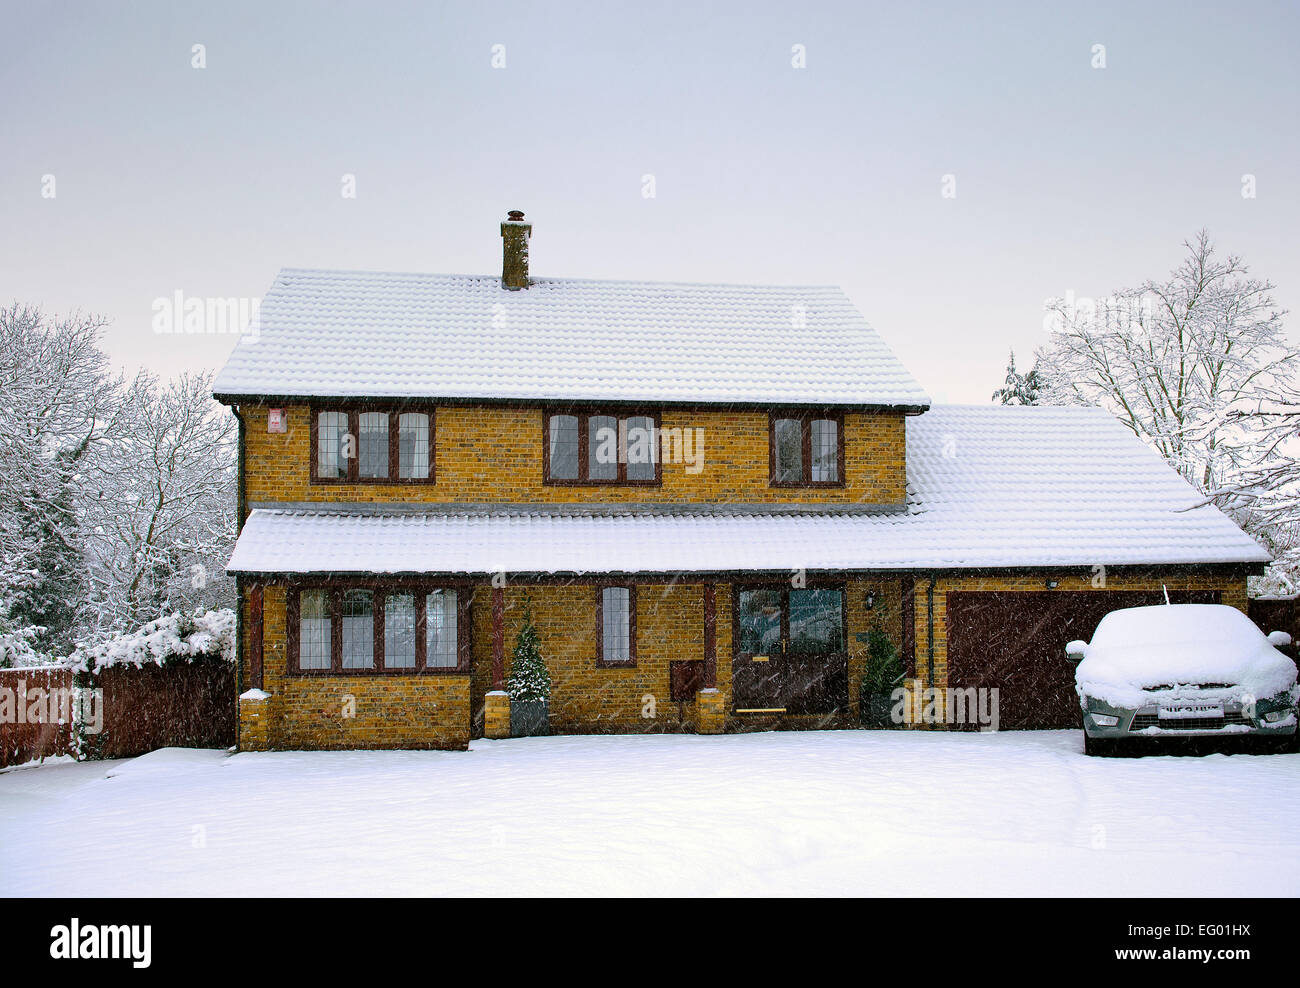 Day time image of large 4 5 bedroom executive style detached house exterior covered in snow Kent UK Stock Photo